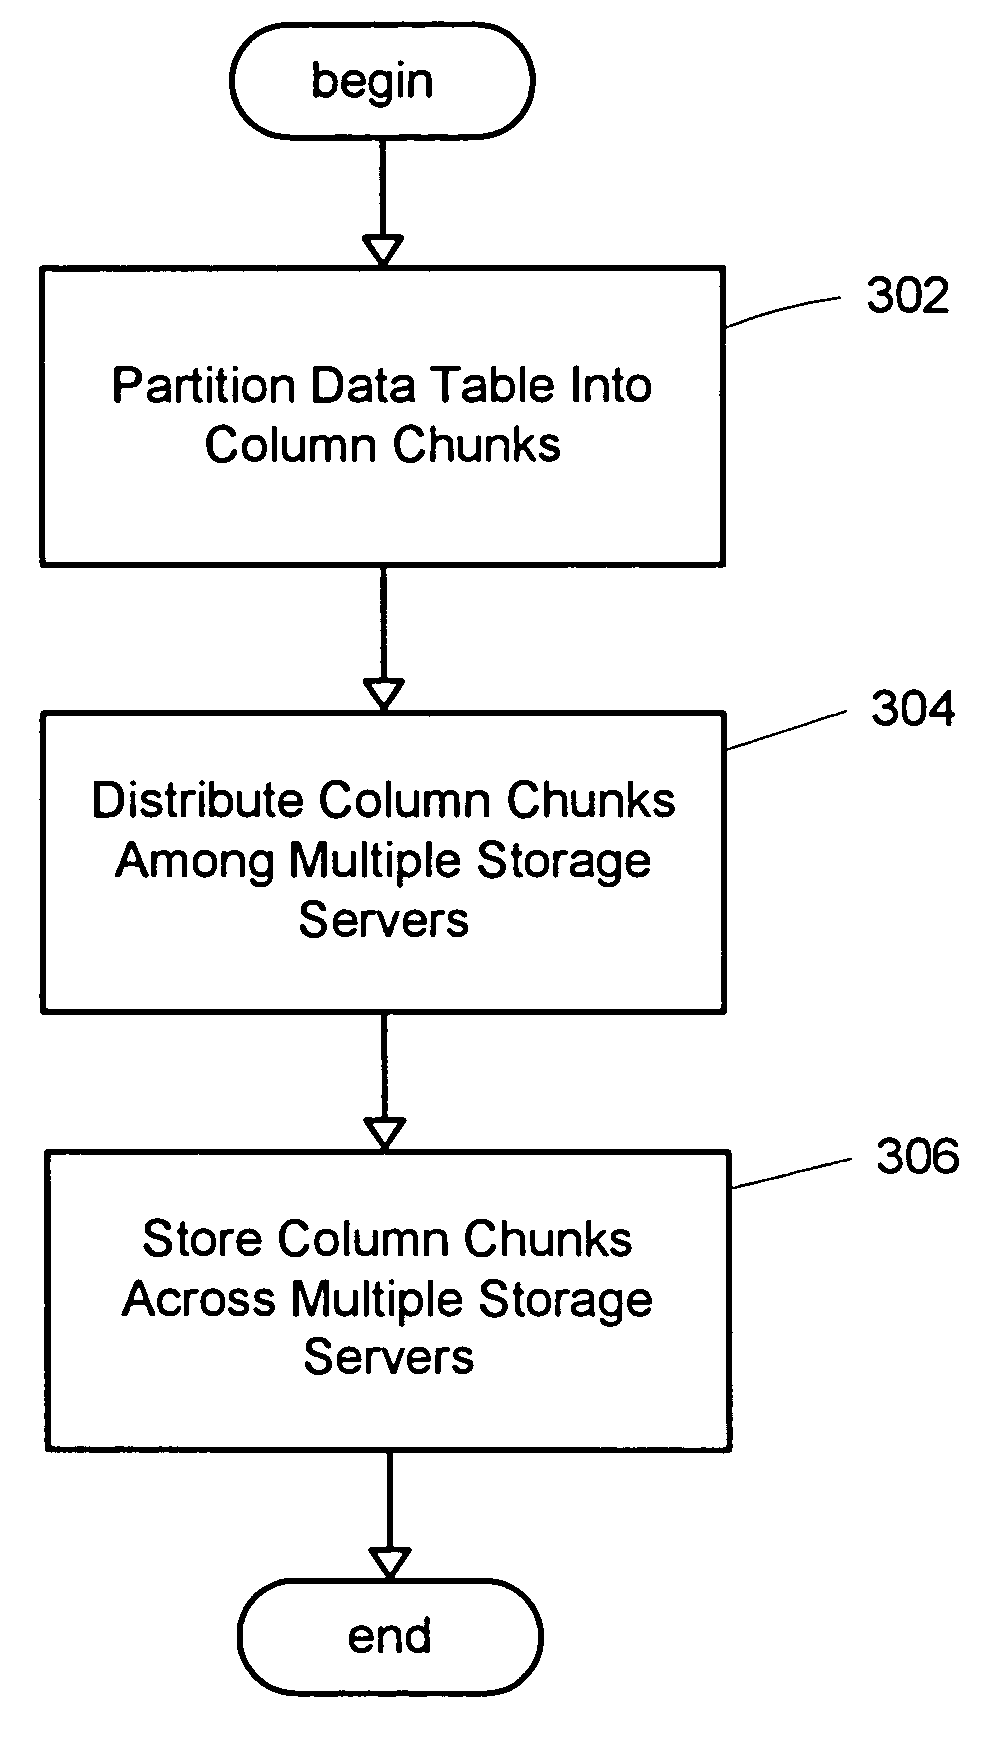 System of a hierarchy of servers for query processing of column chunks in a distributed column chunk data store